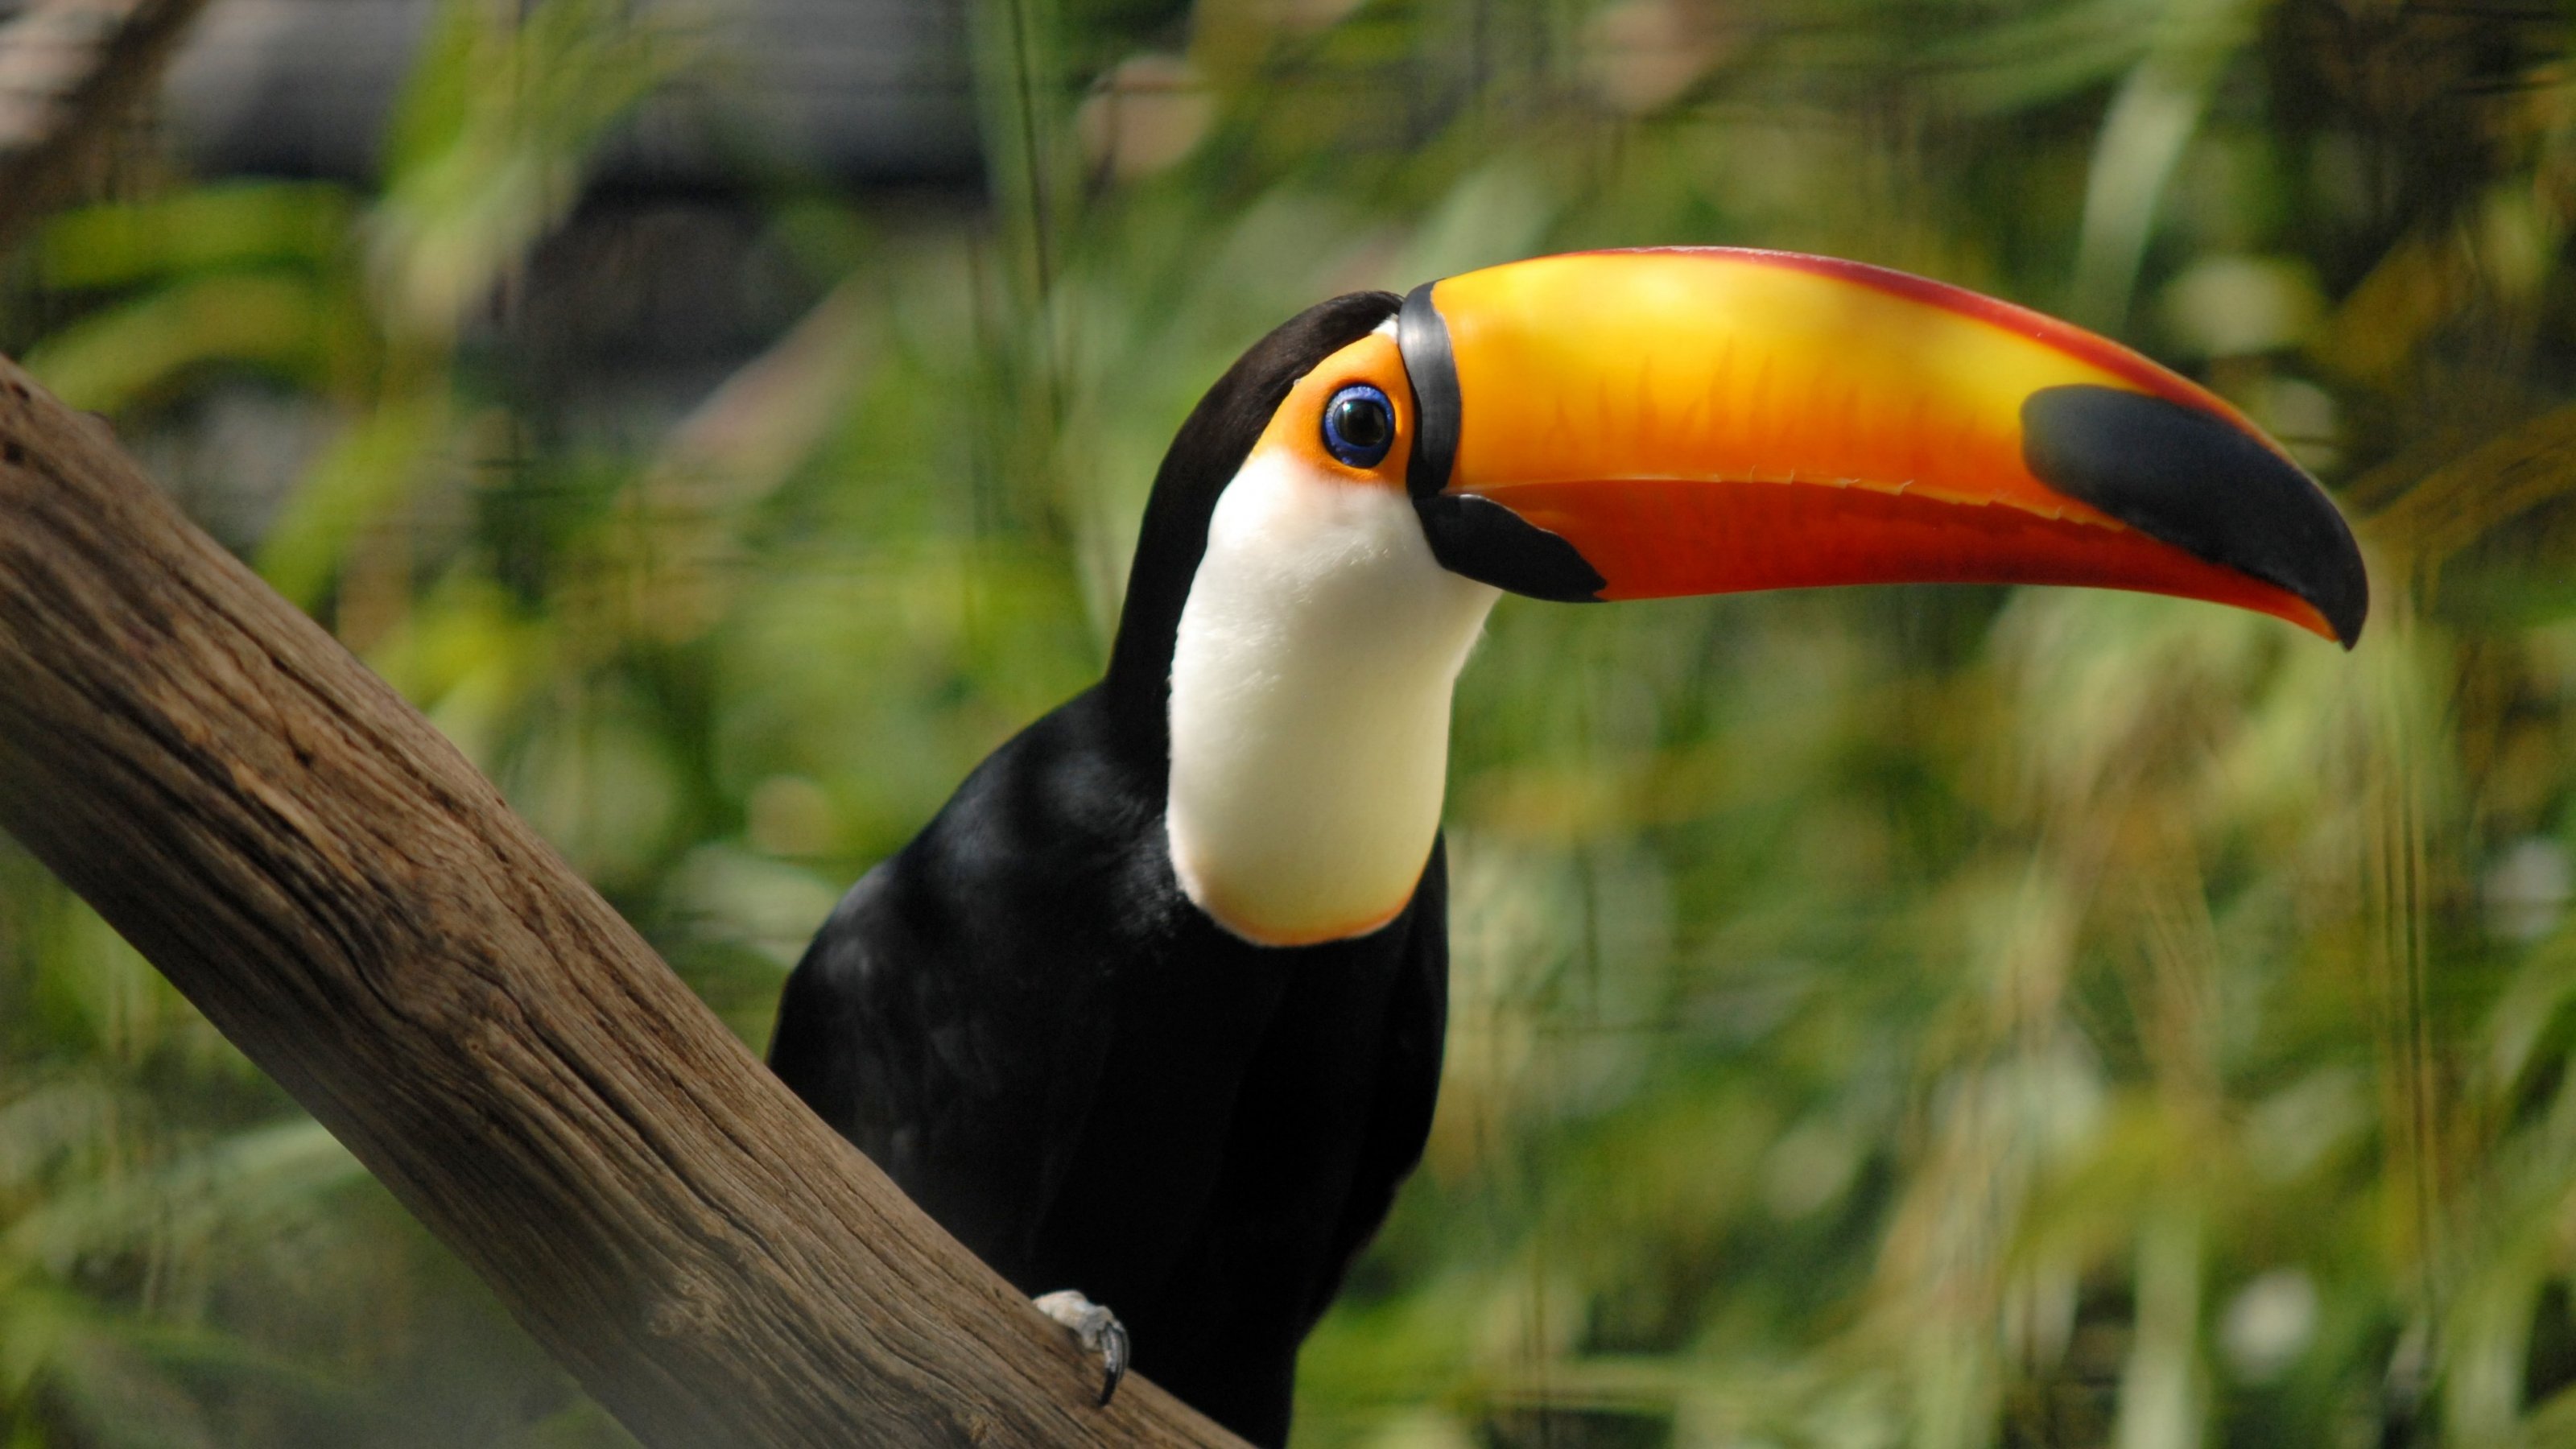 Toucan Parrot Wallpaper - Different Types Of Birds In The World - HD Wallpaper 